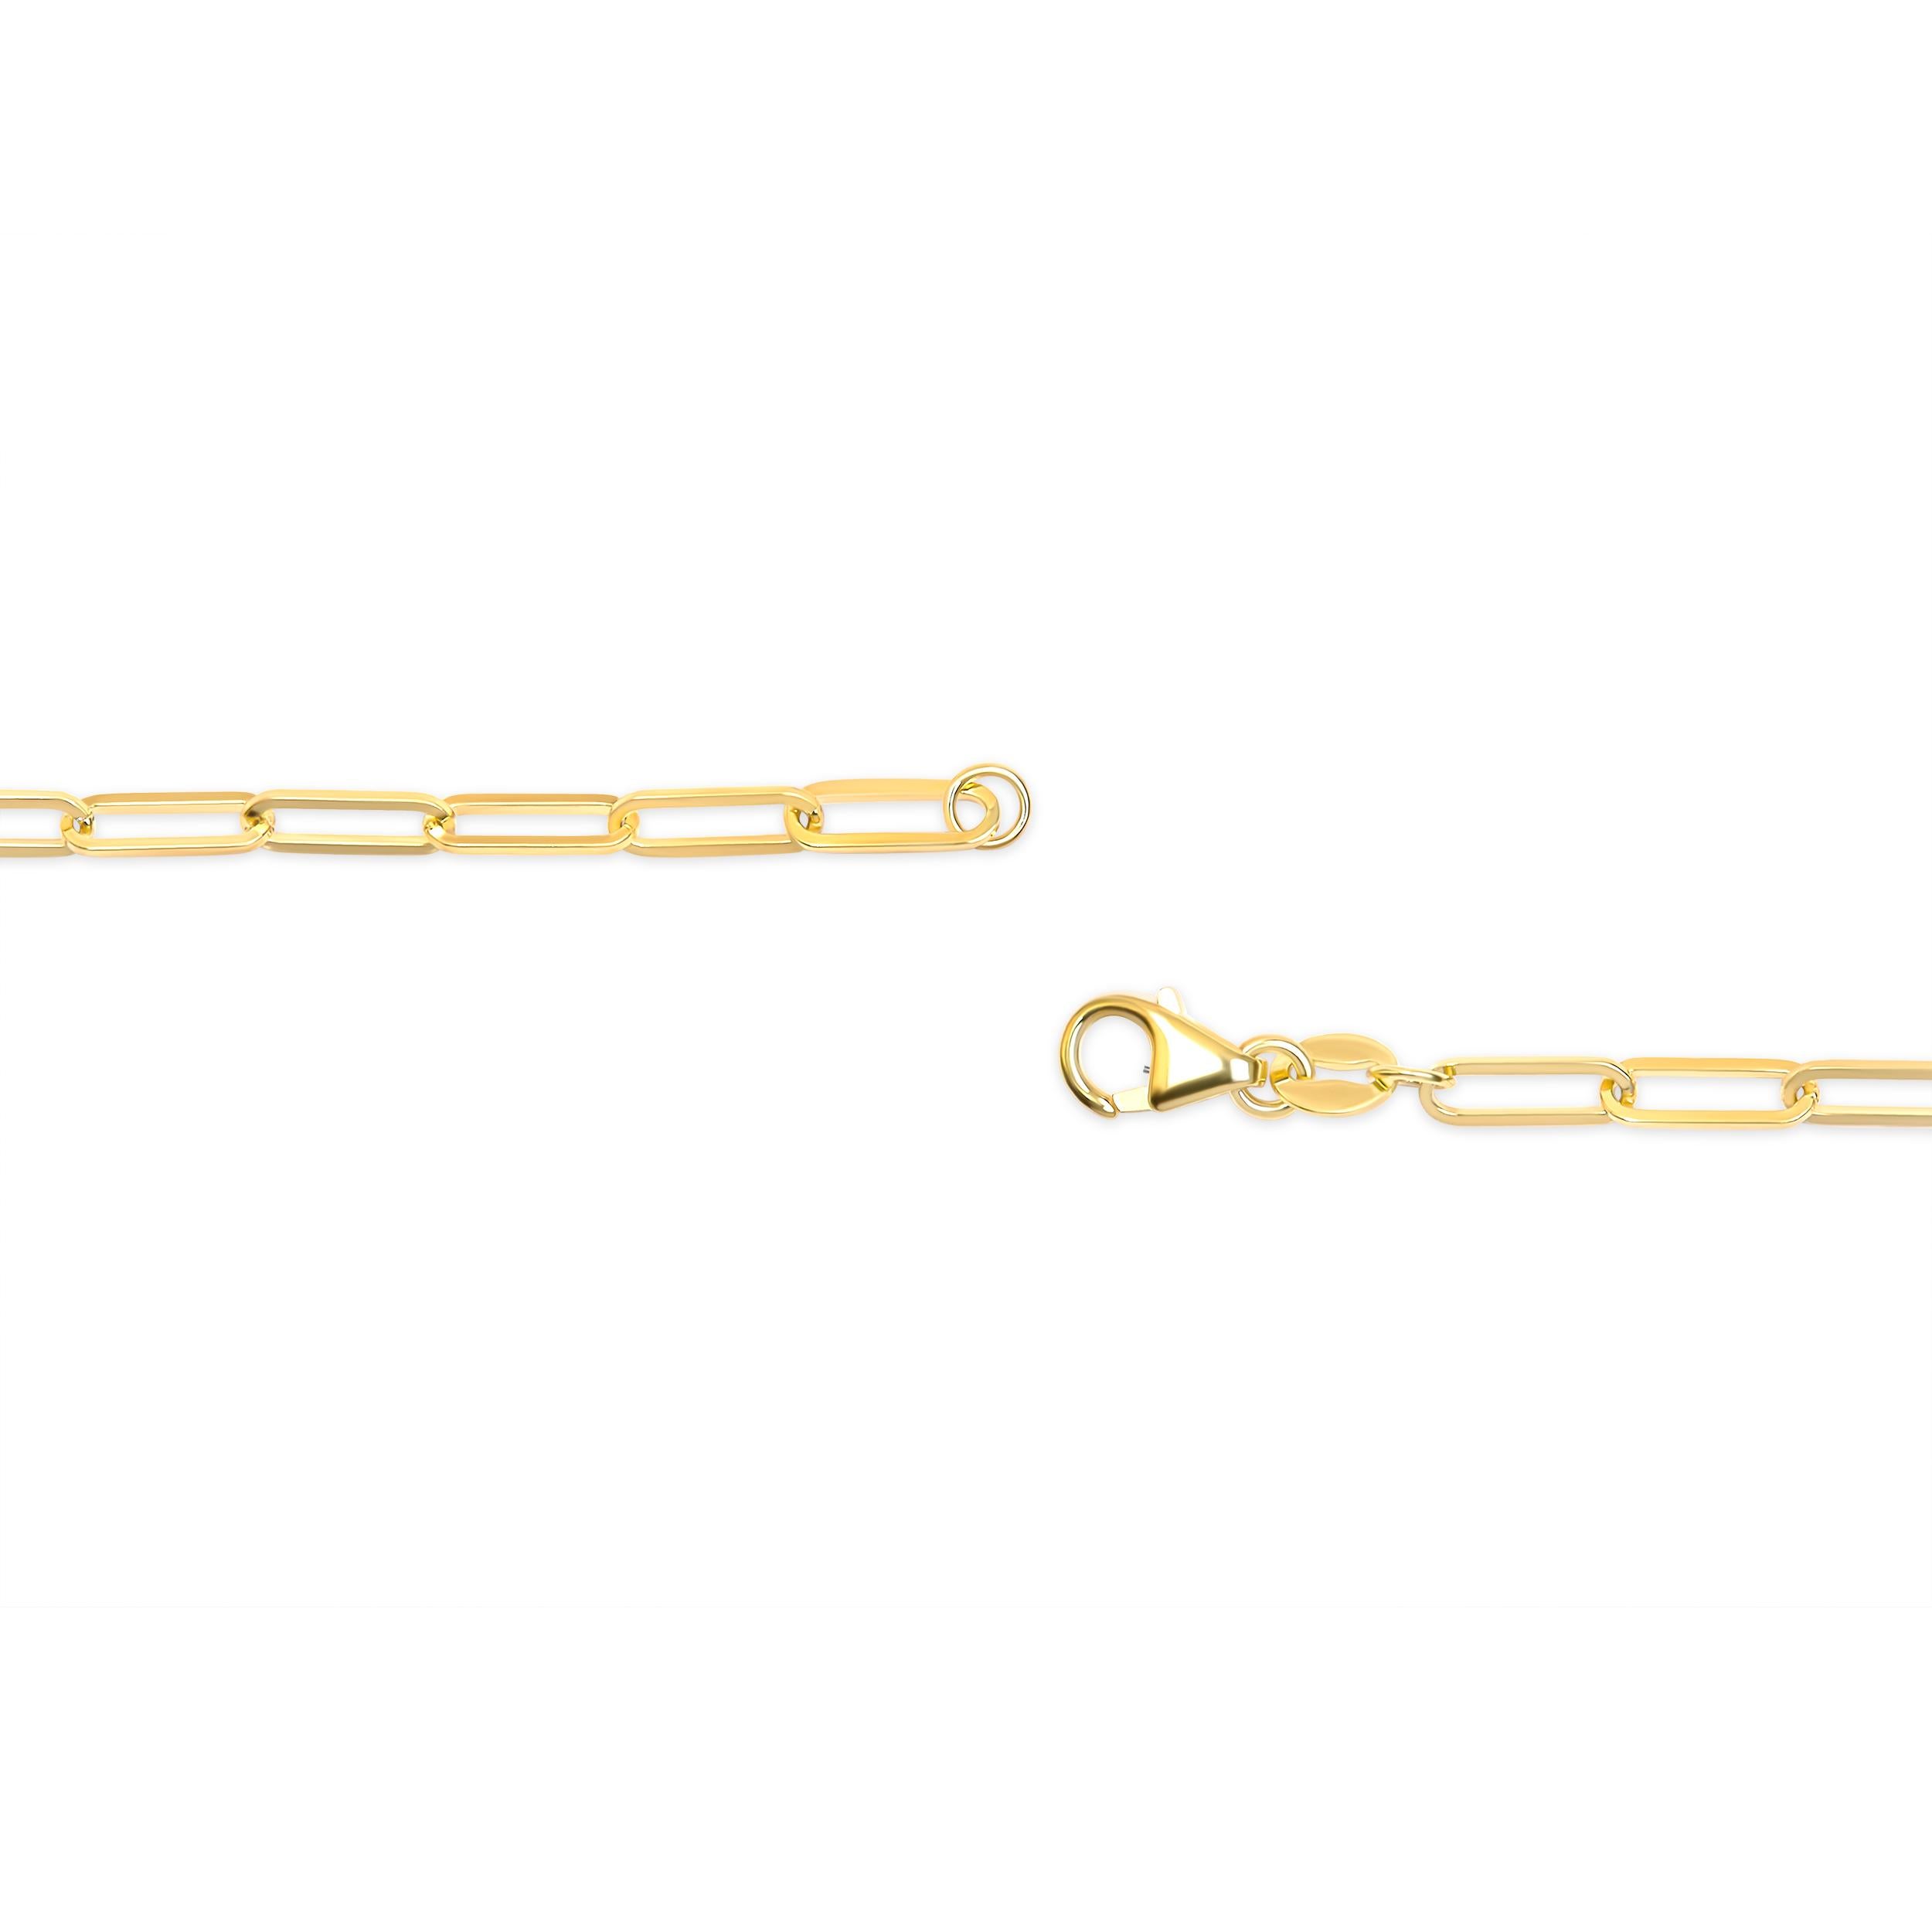 Introducing a timeless masterpiece, this exquisite 14K Yellow Gold Paperclip Chain Necklace is a captivating blend of elegance and versatility. Crafted with meticulous attention to detail, this unisex chain features a 2.5mm width and a 18-inch